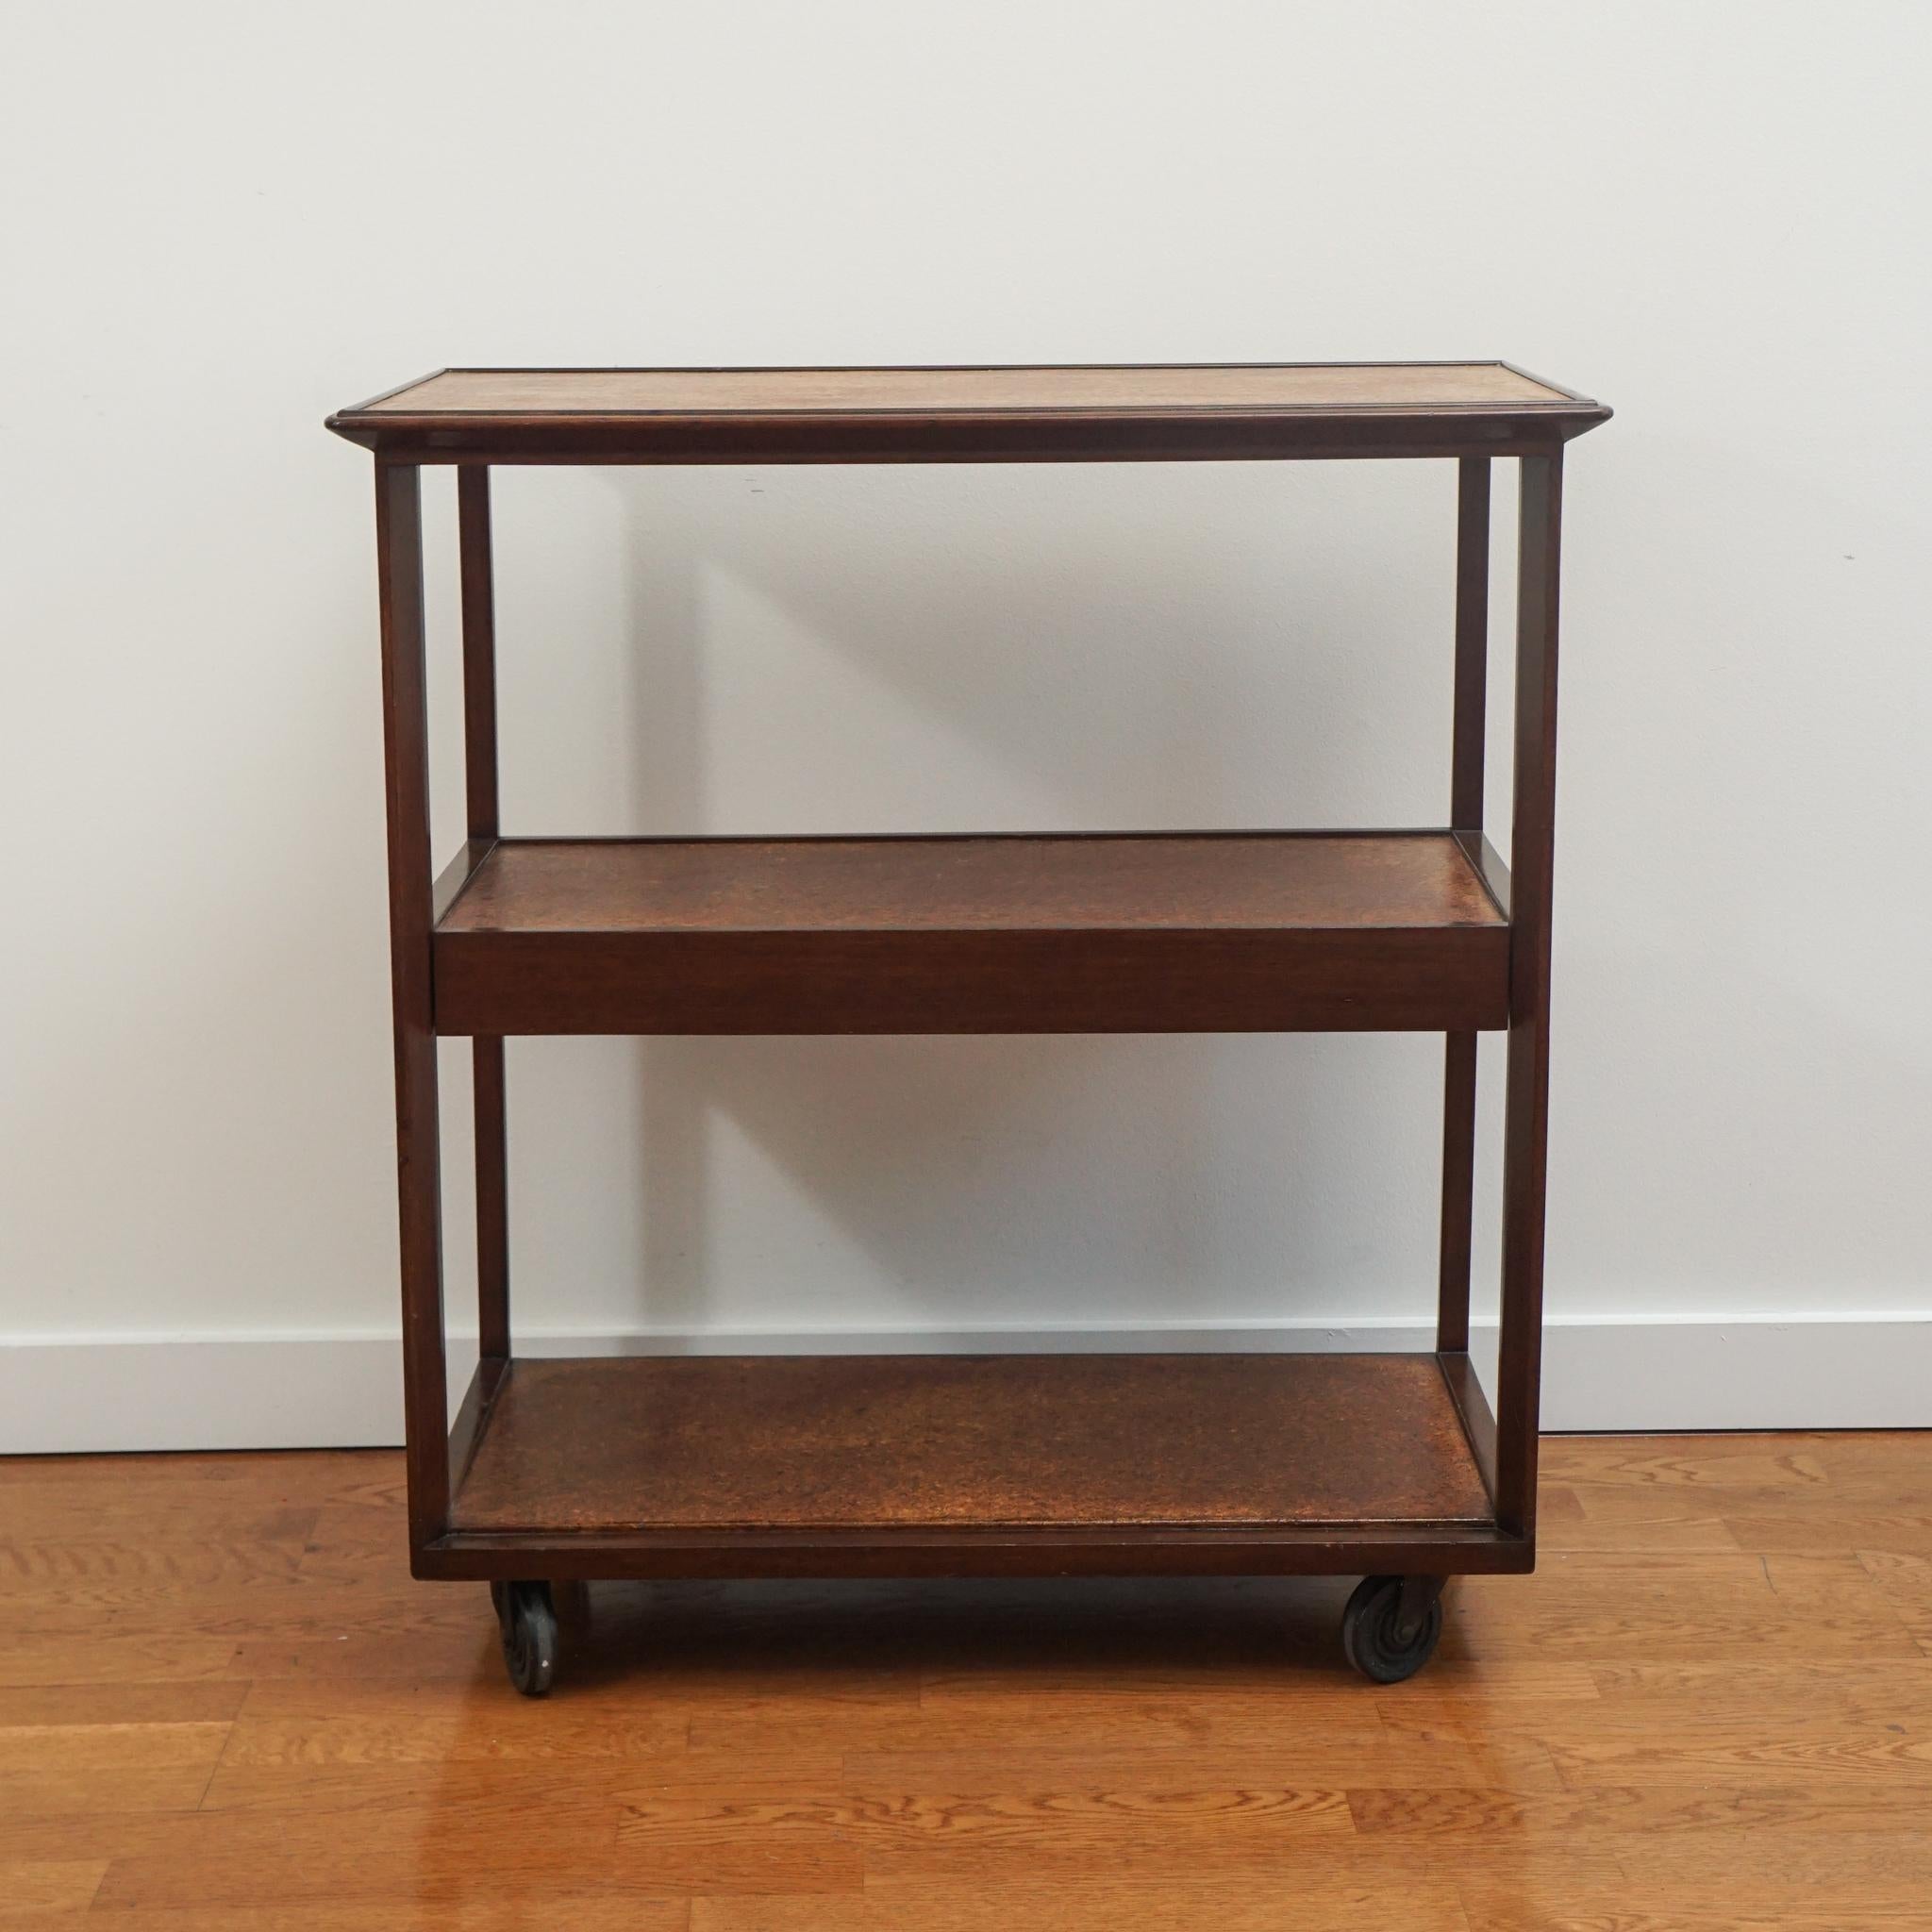 The Edward Wormley bar cart, shown here, is certain to make entertaining a little more special. Made for Dunbar, the rosewood frame cart features a cork inlay top and lower shelves. Casters add easy mobility. 